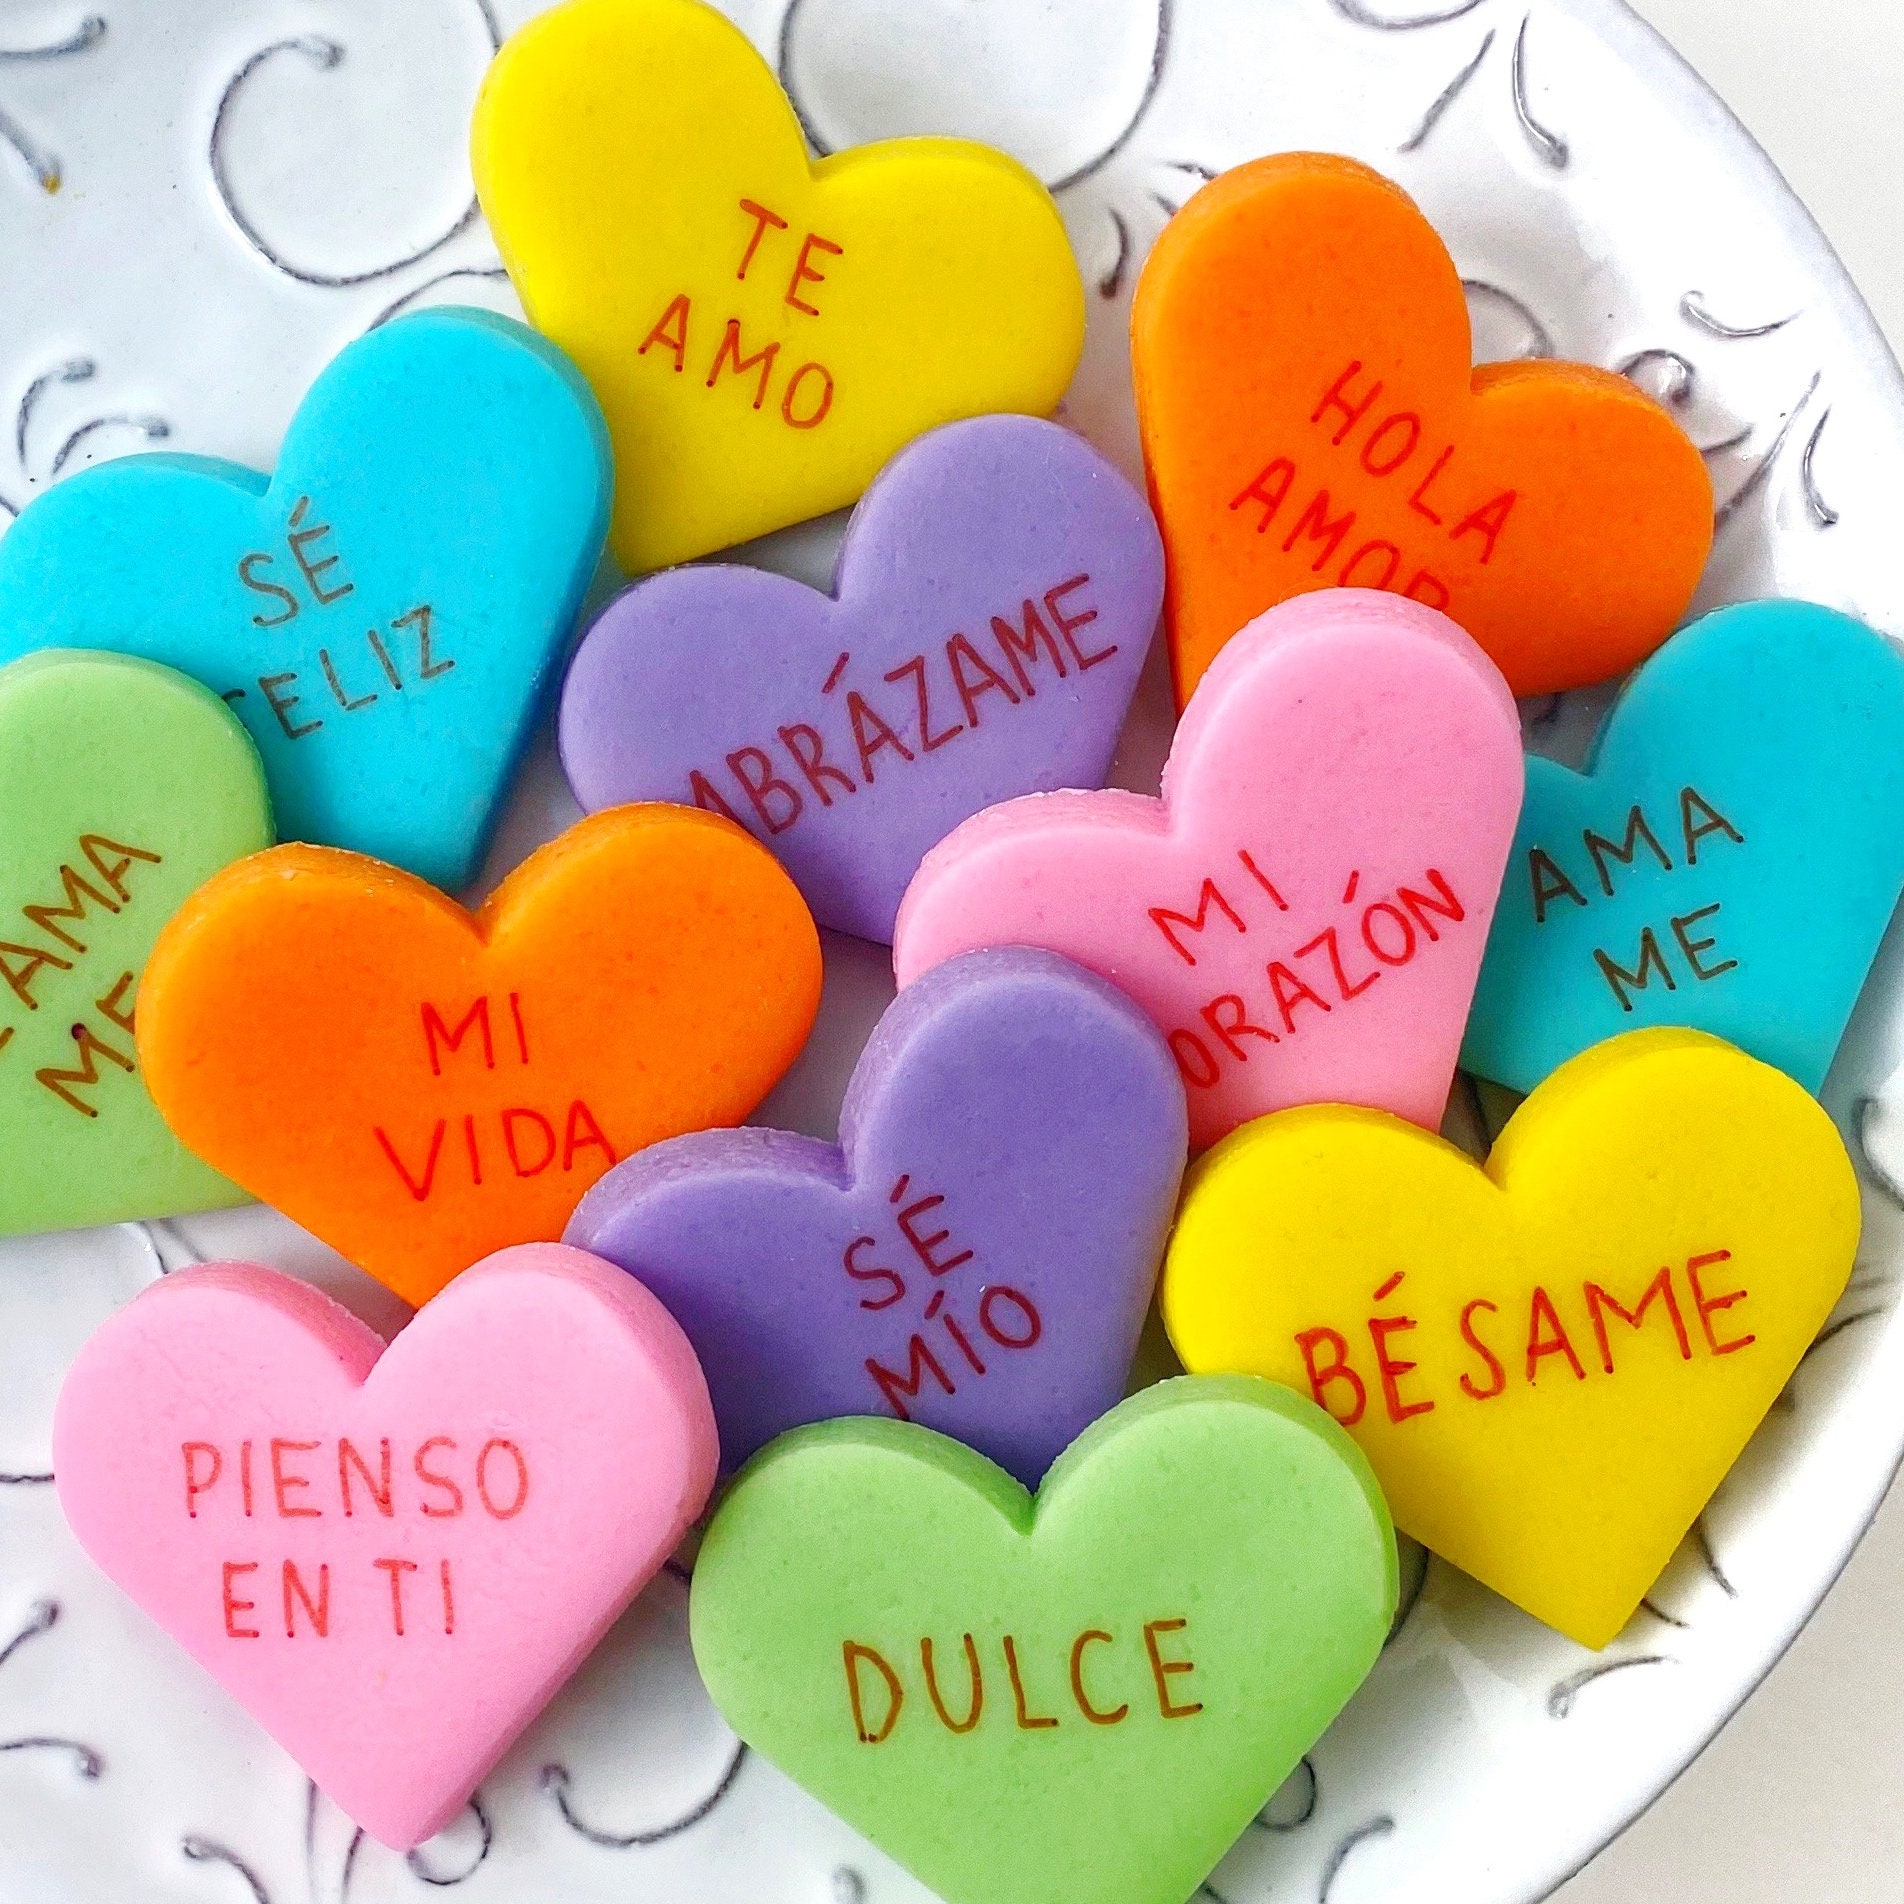 Small Conversation Hearts by Cambie | 2 lbs of Pastel Valentine's Candy | Delicious Fruity & Mint Flavors in A Colorful Pastel Display | Conversation